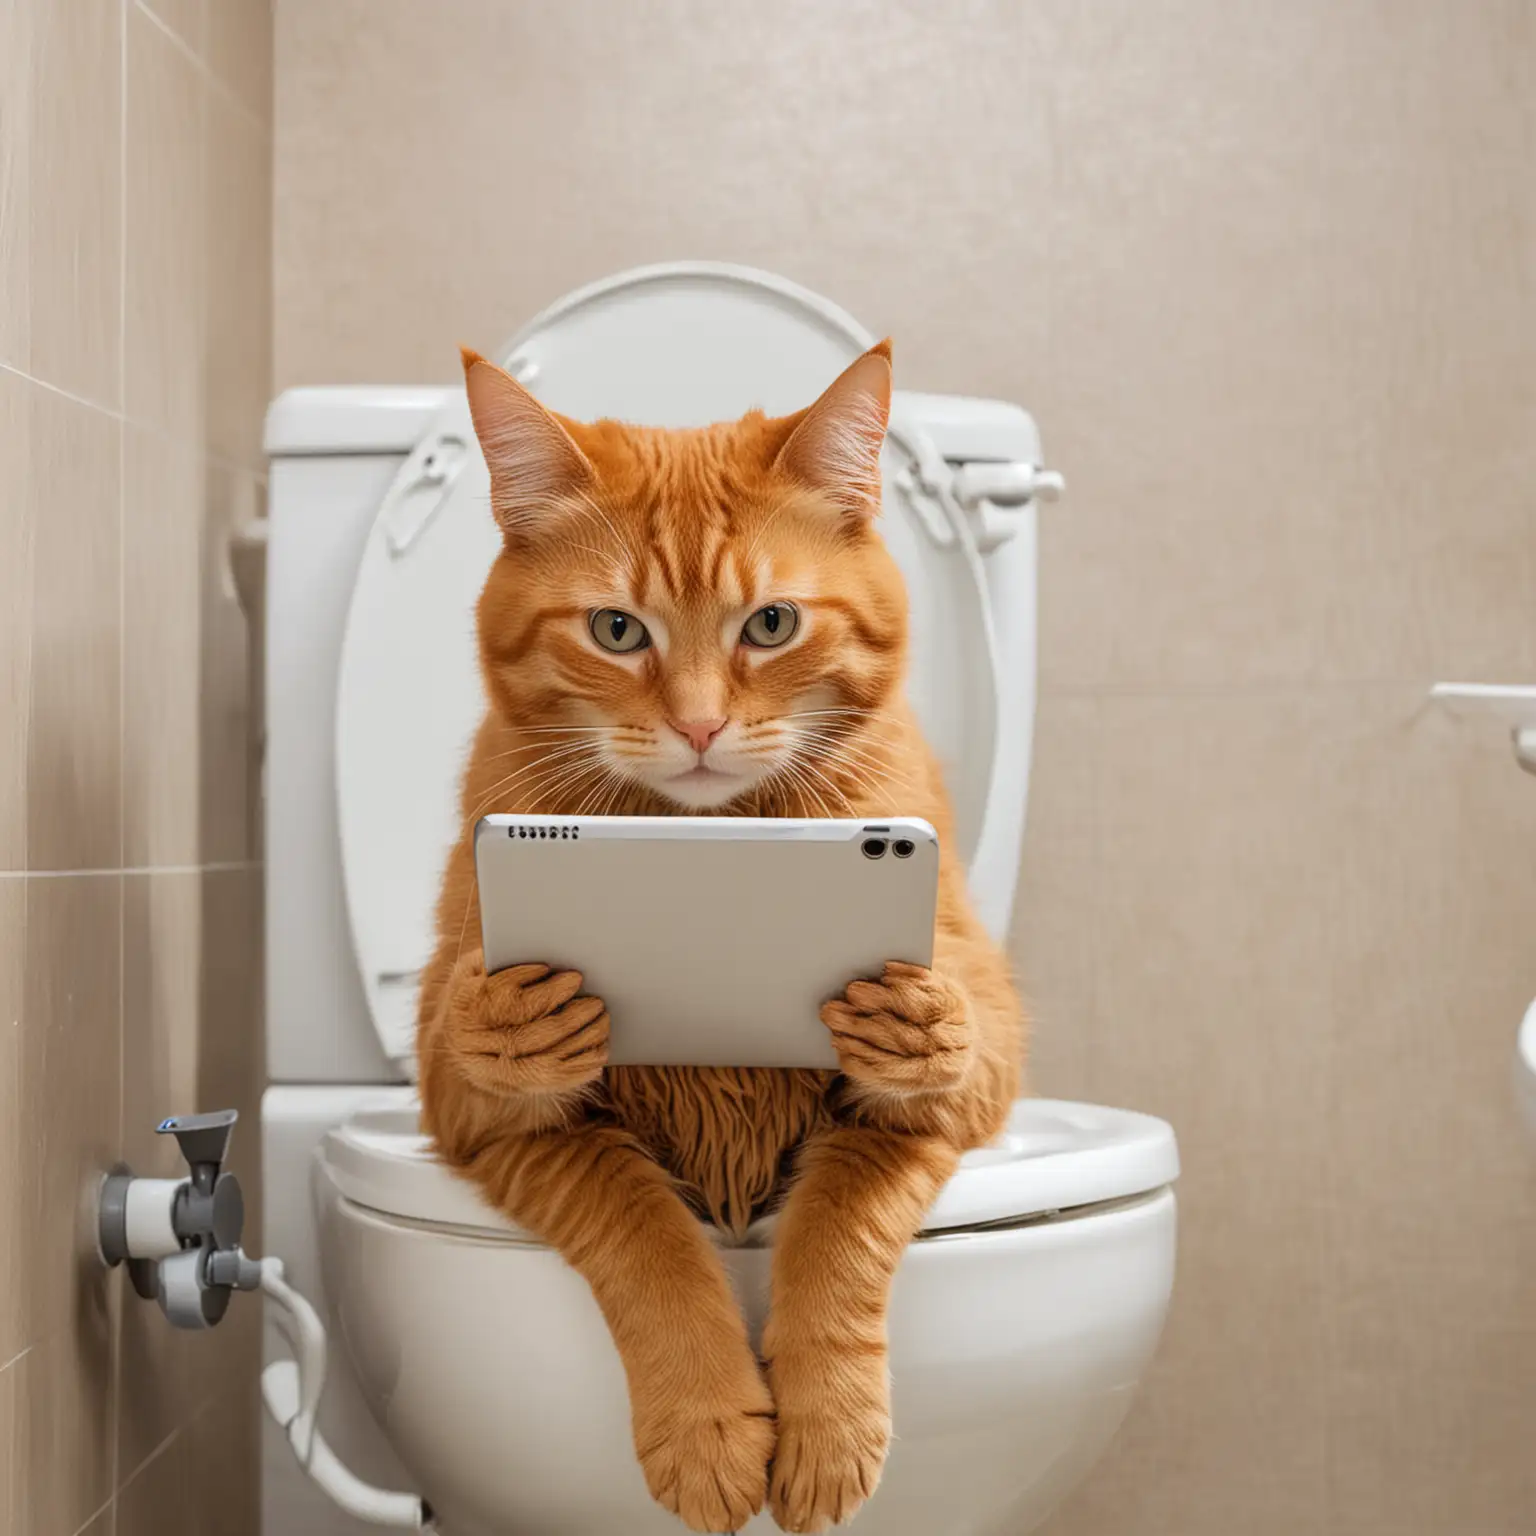 Ginger cat sits on the toilet and is captivated reading news on a smartphone